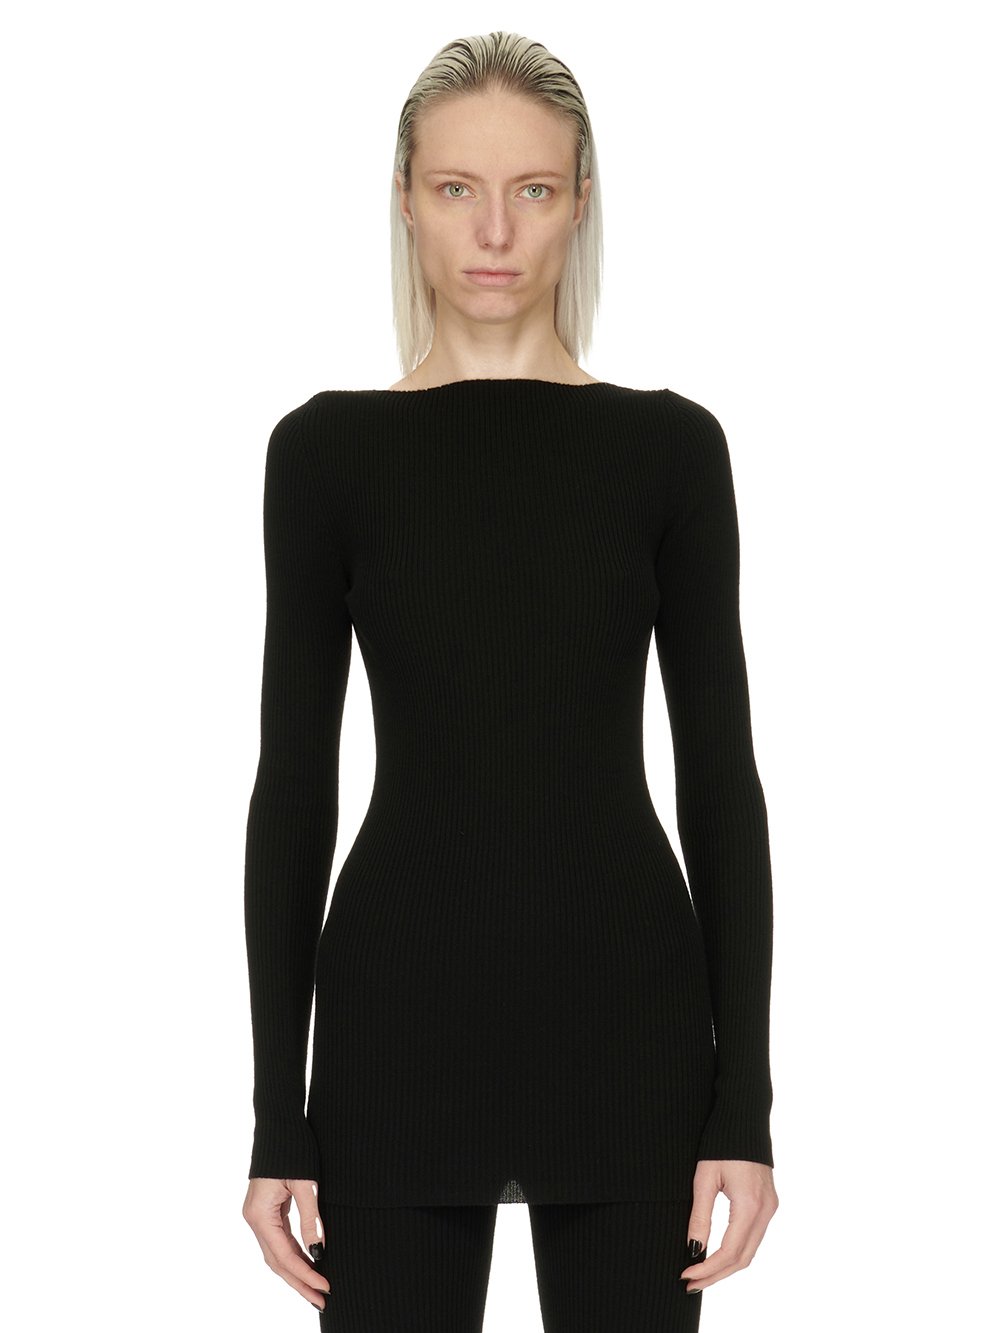 RICK OWENS FW23 LUXOR AL TOP IN BLACK LIGHTWEIGHT RIBBED KNIT